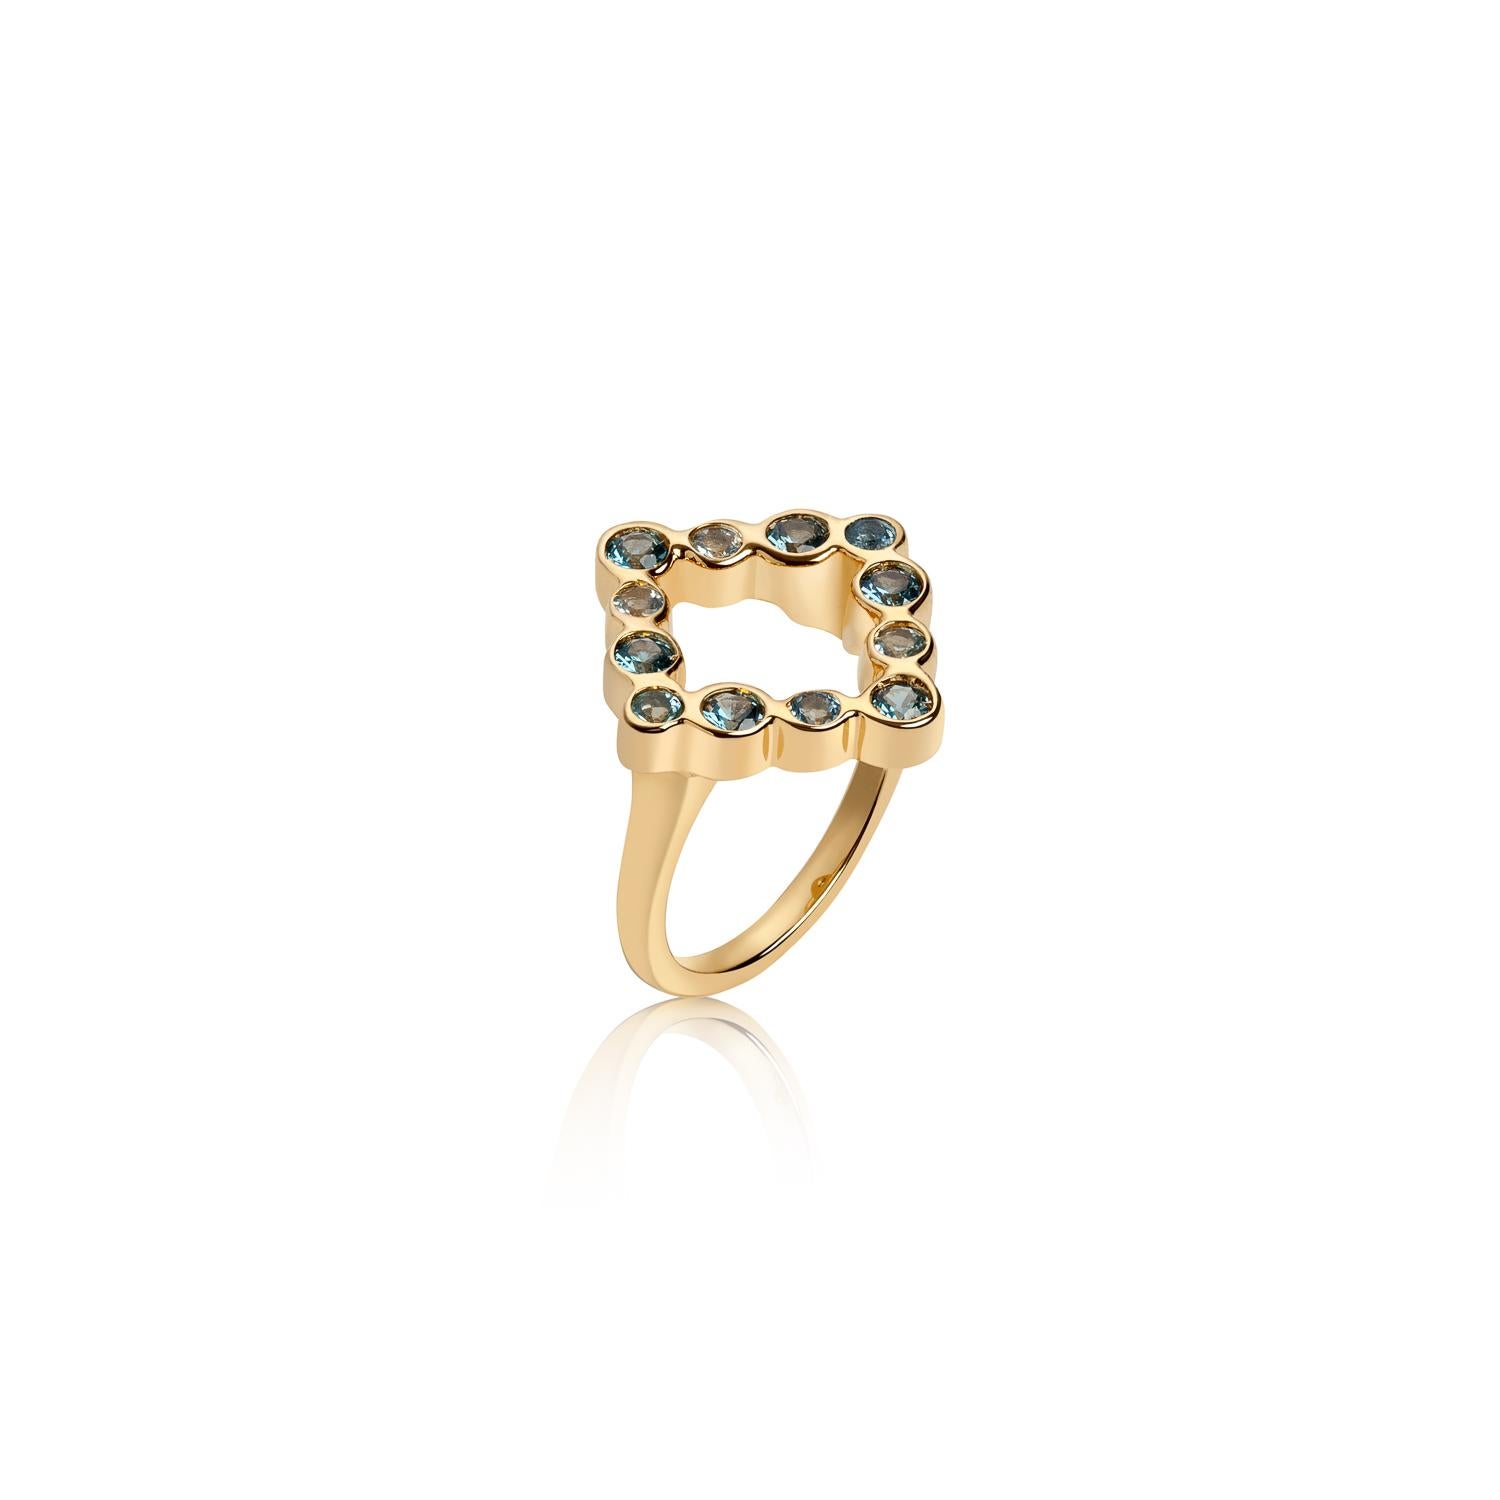 Wear this open kite shape shape ring composed of Hi June Parker's signature organic circles filled
with gemstones to celebrate your sense of equality.

Inspired by seeing the cross-section view of life, as if slicing a tree to see its underlying